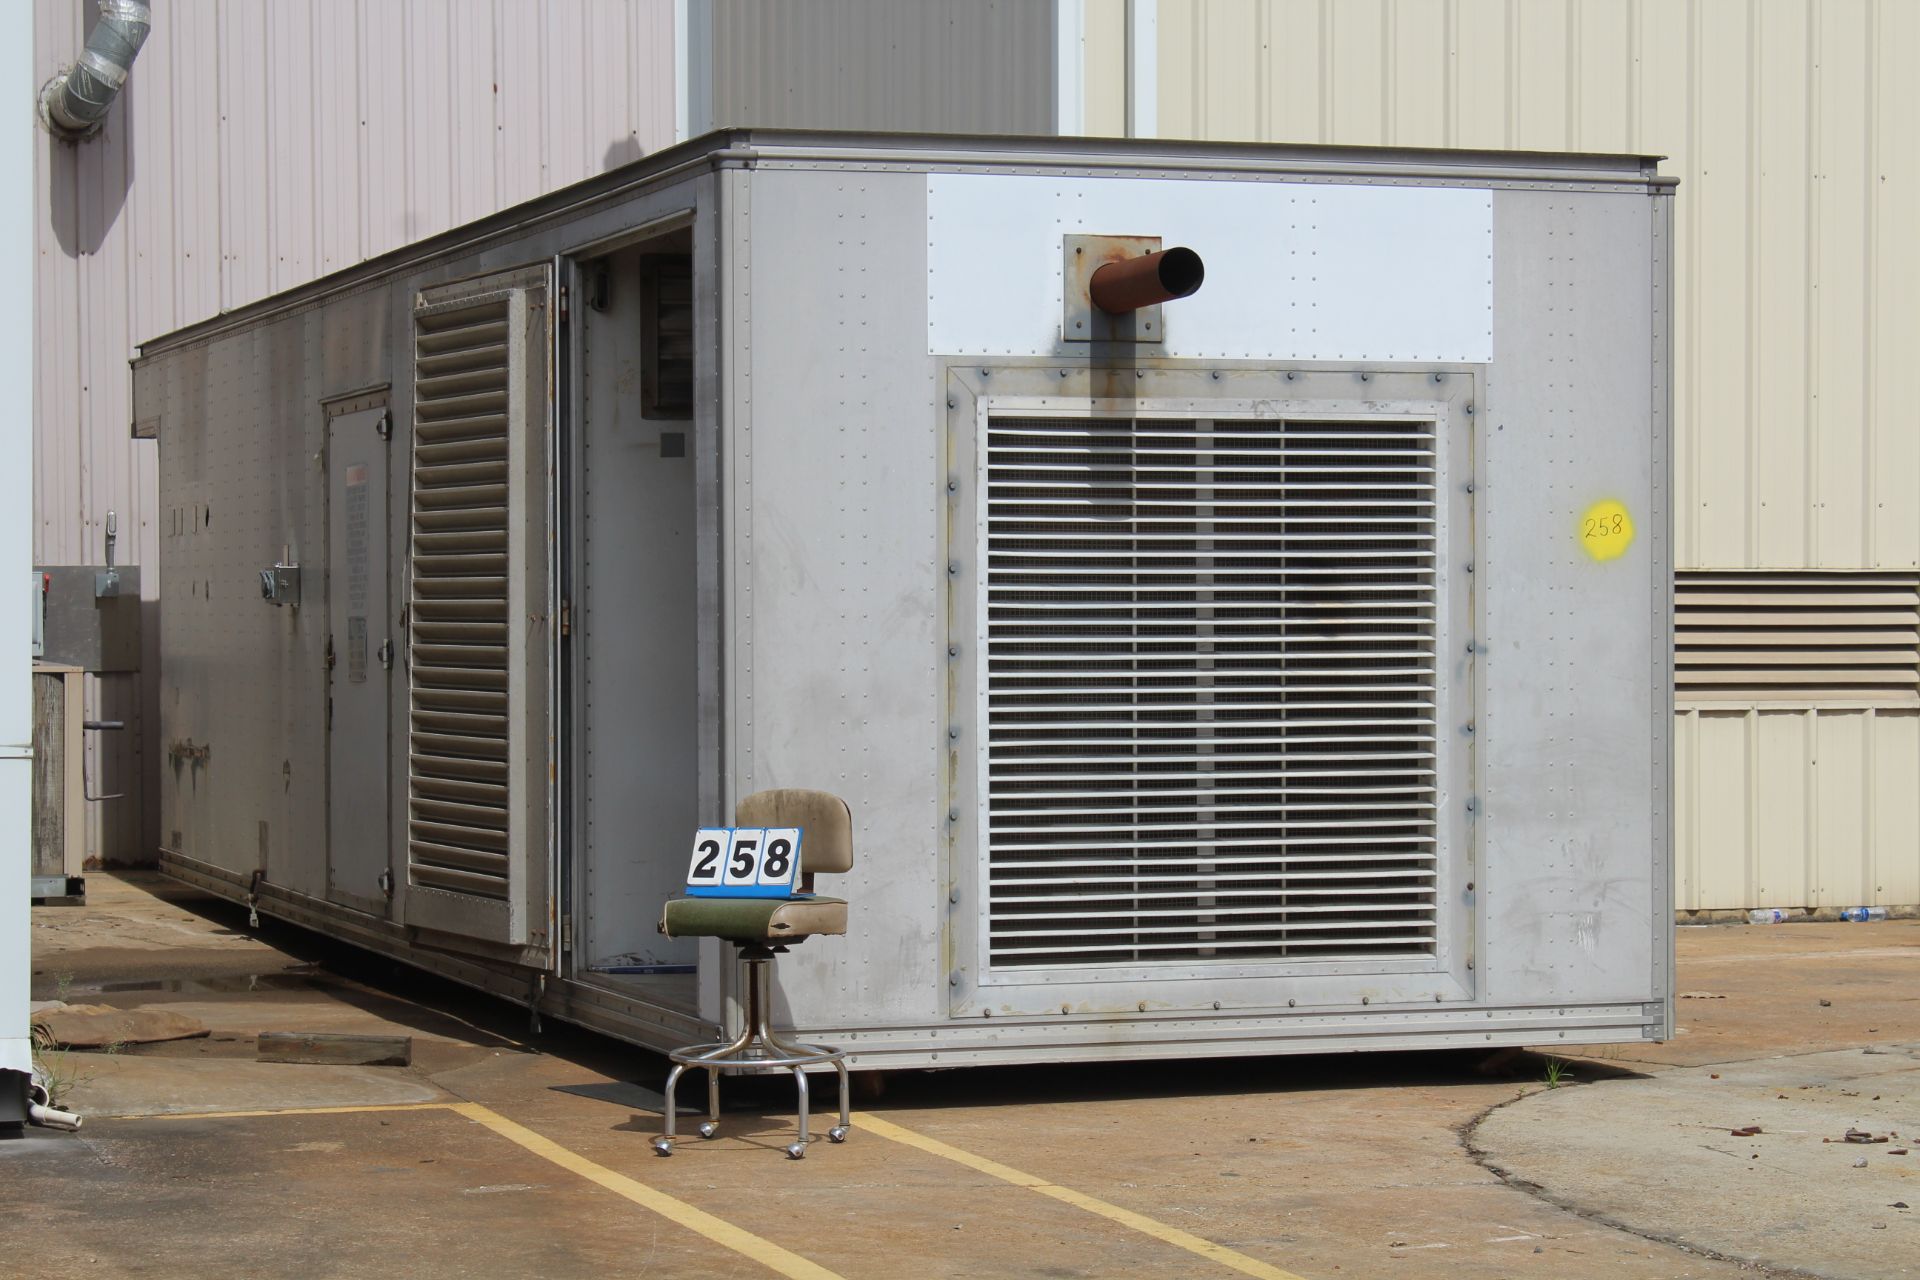 PORTABLE POWER PLANT/STANDBY POWER UNIT, ATLANTIC 125 KW, S/N 125-275-75, enclosed in 30' Prichard